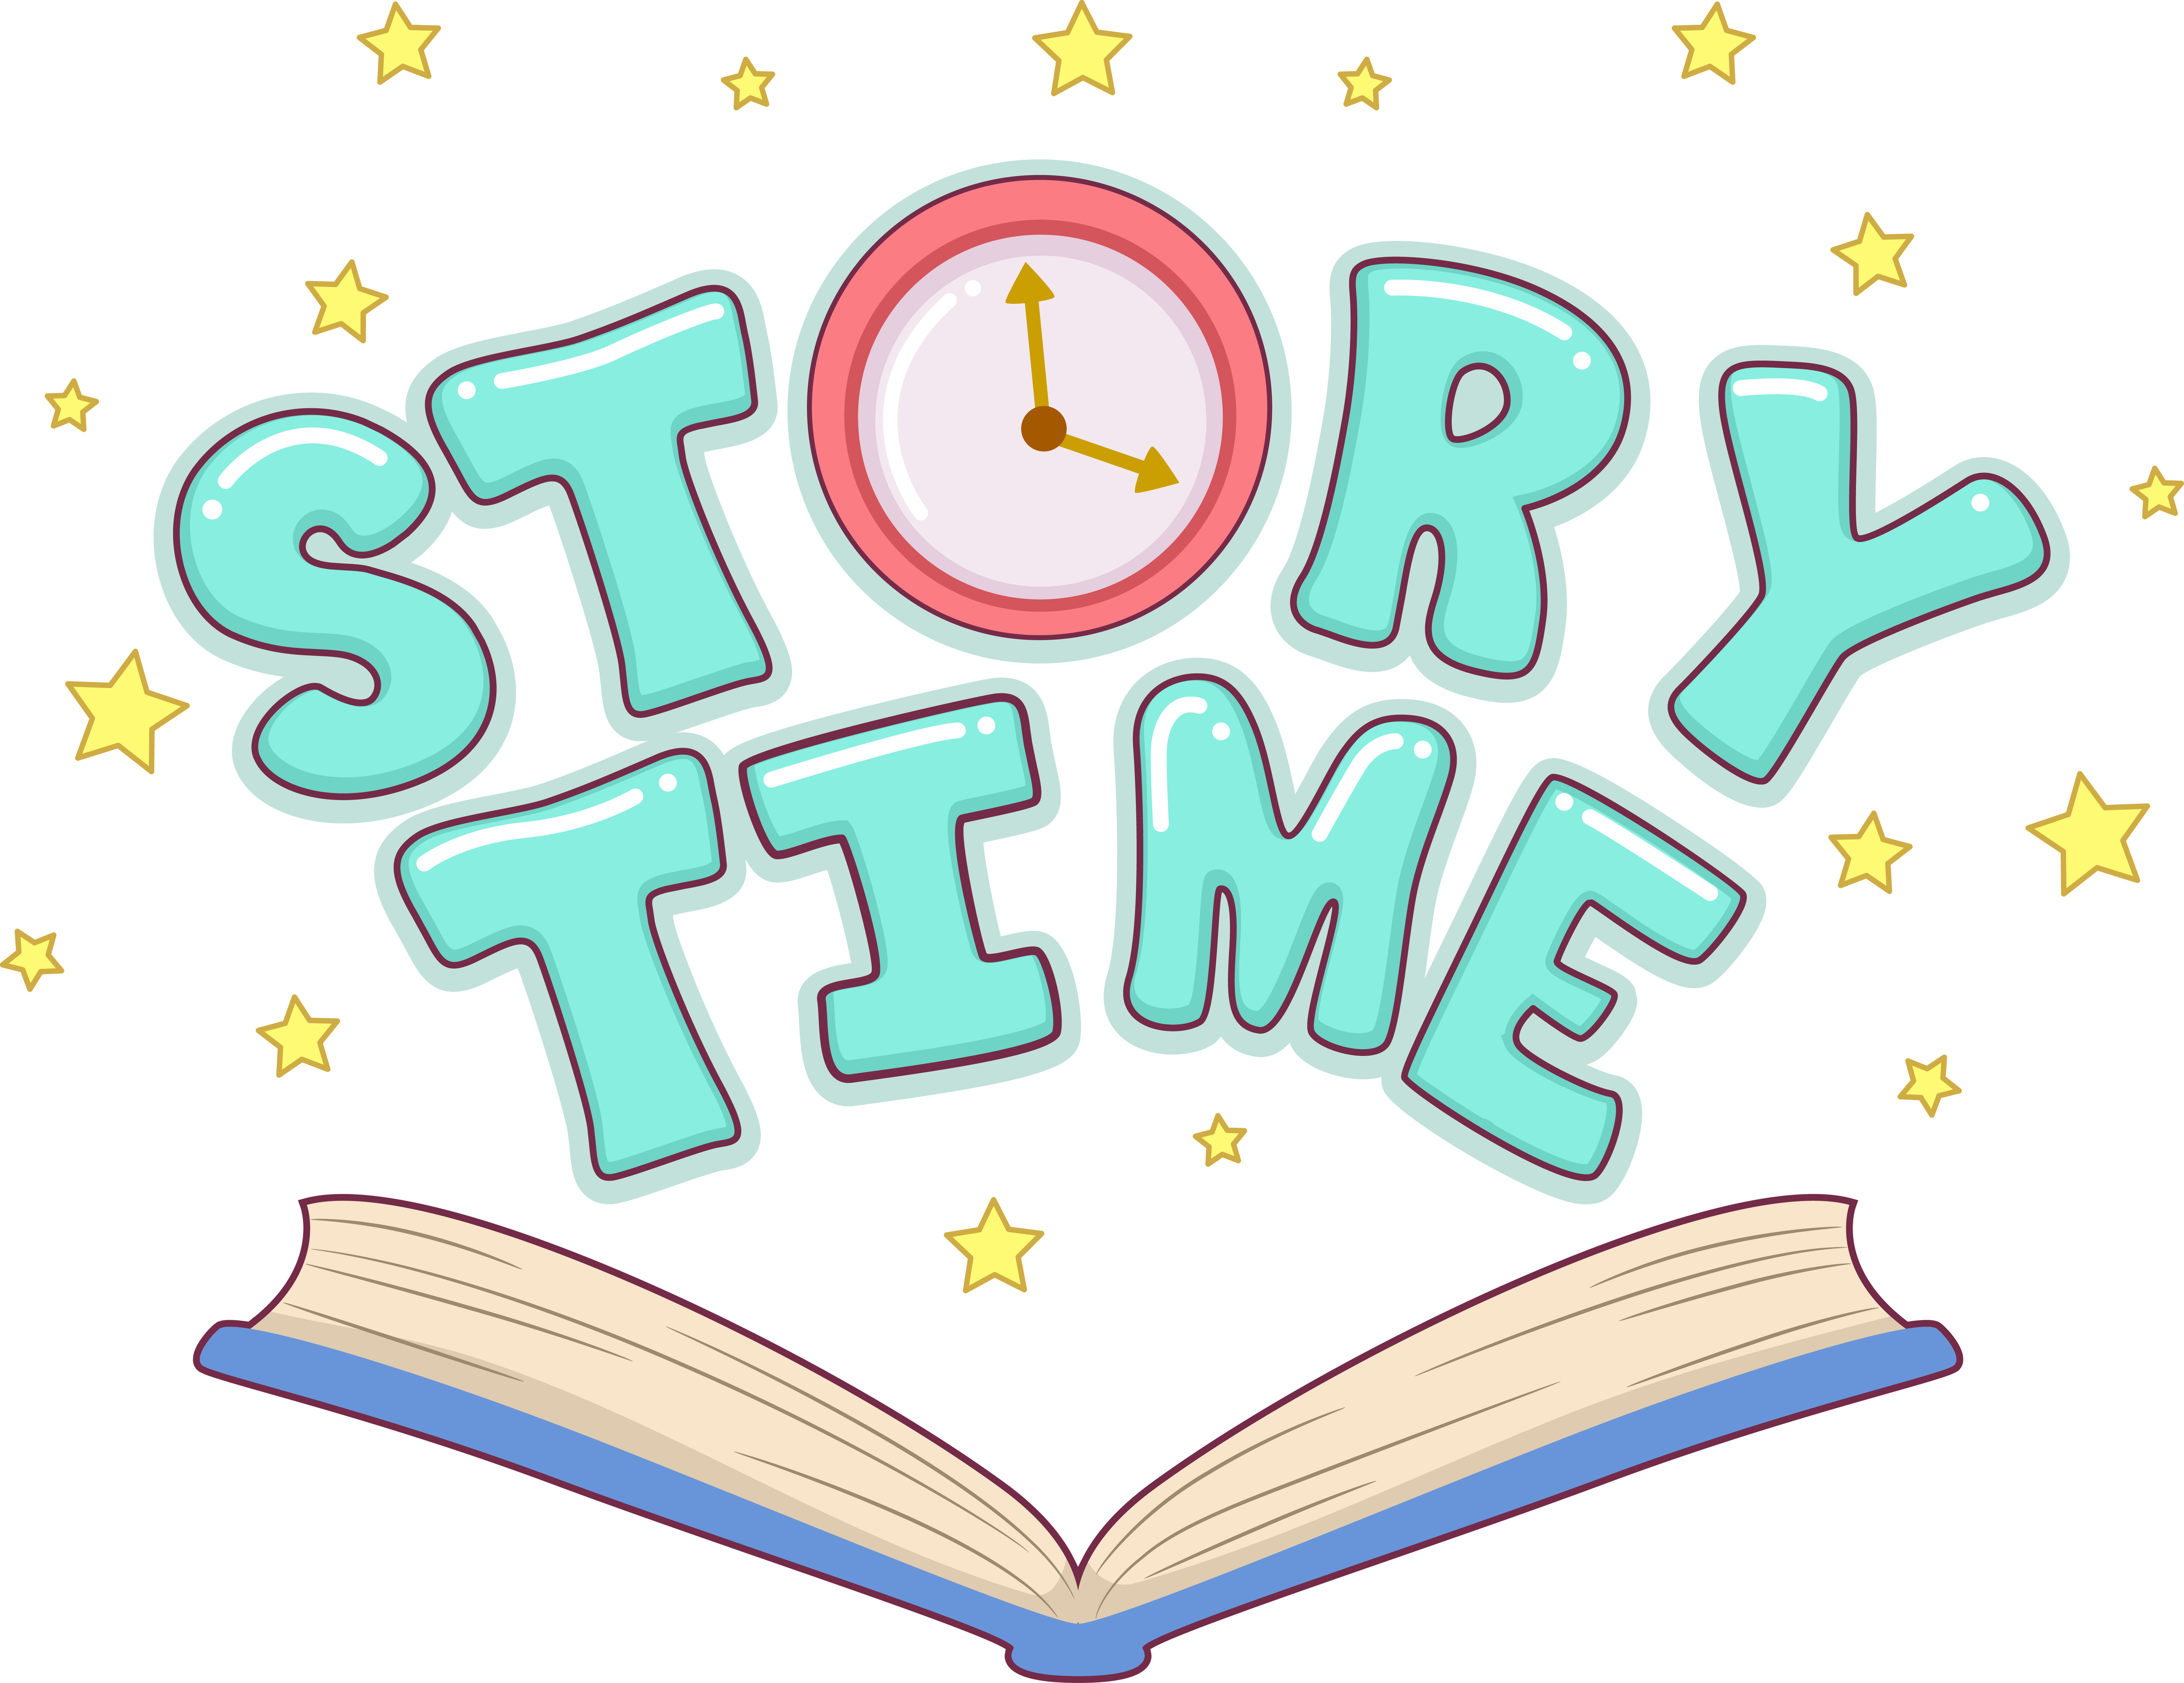 Image of open book with the word Story time above it with yellow stars. The o in story time is replaced with an analog clock.